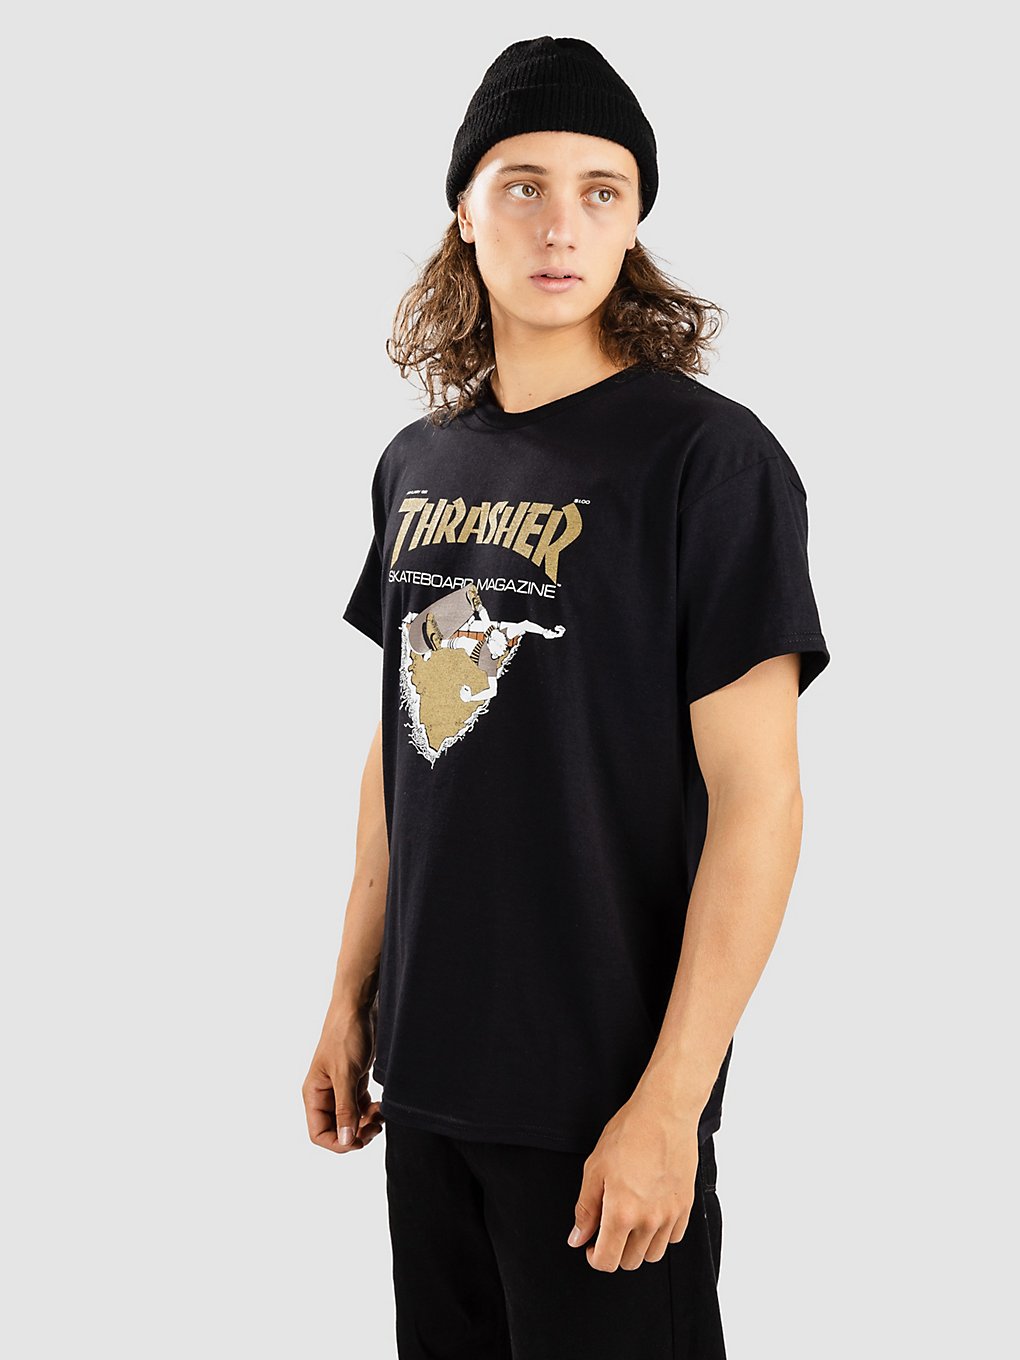 Thrasher First Cover T-Shirt gold kaufen